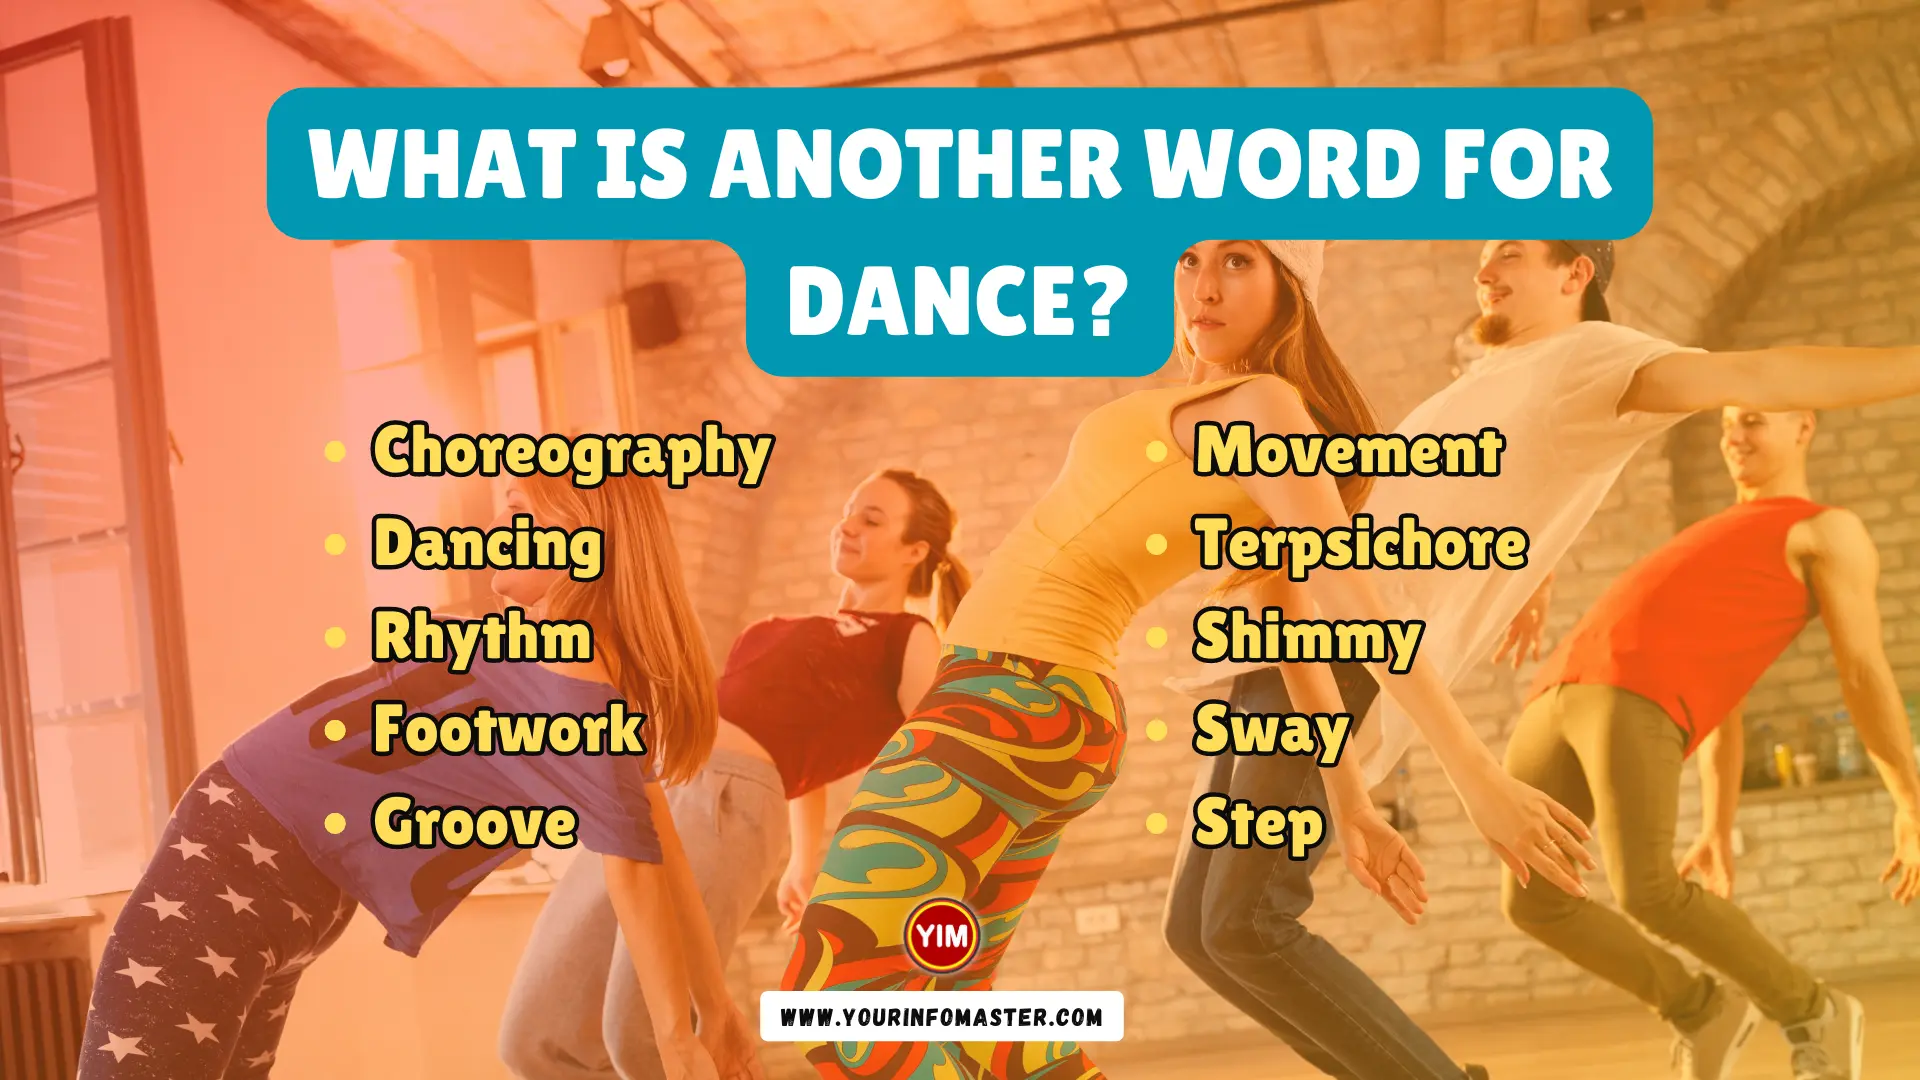 What is another word for Dance